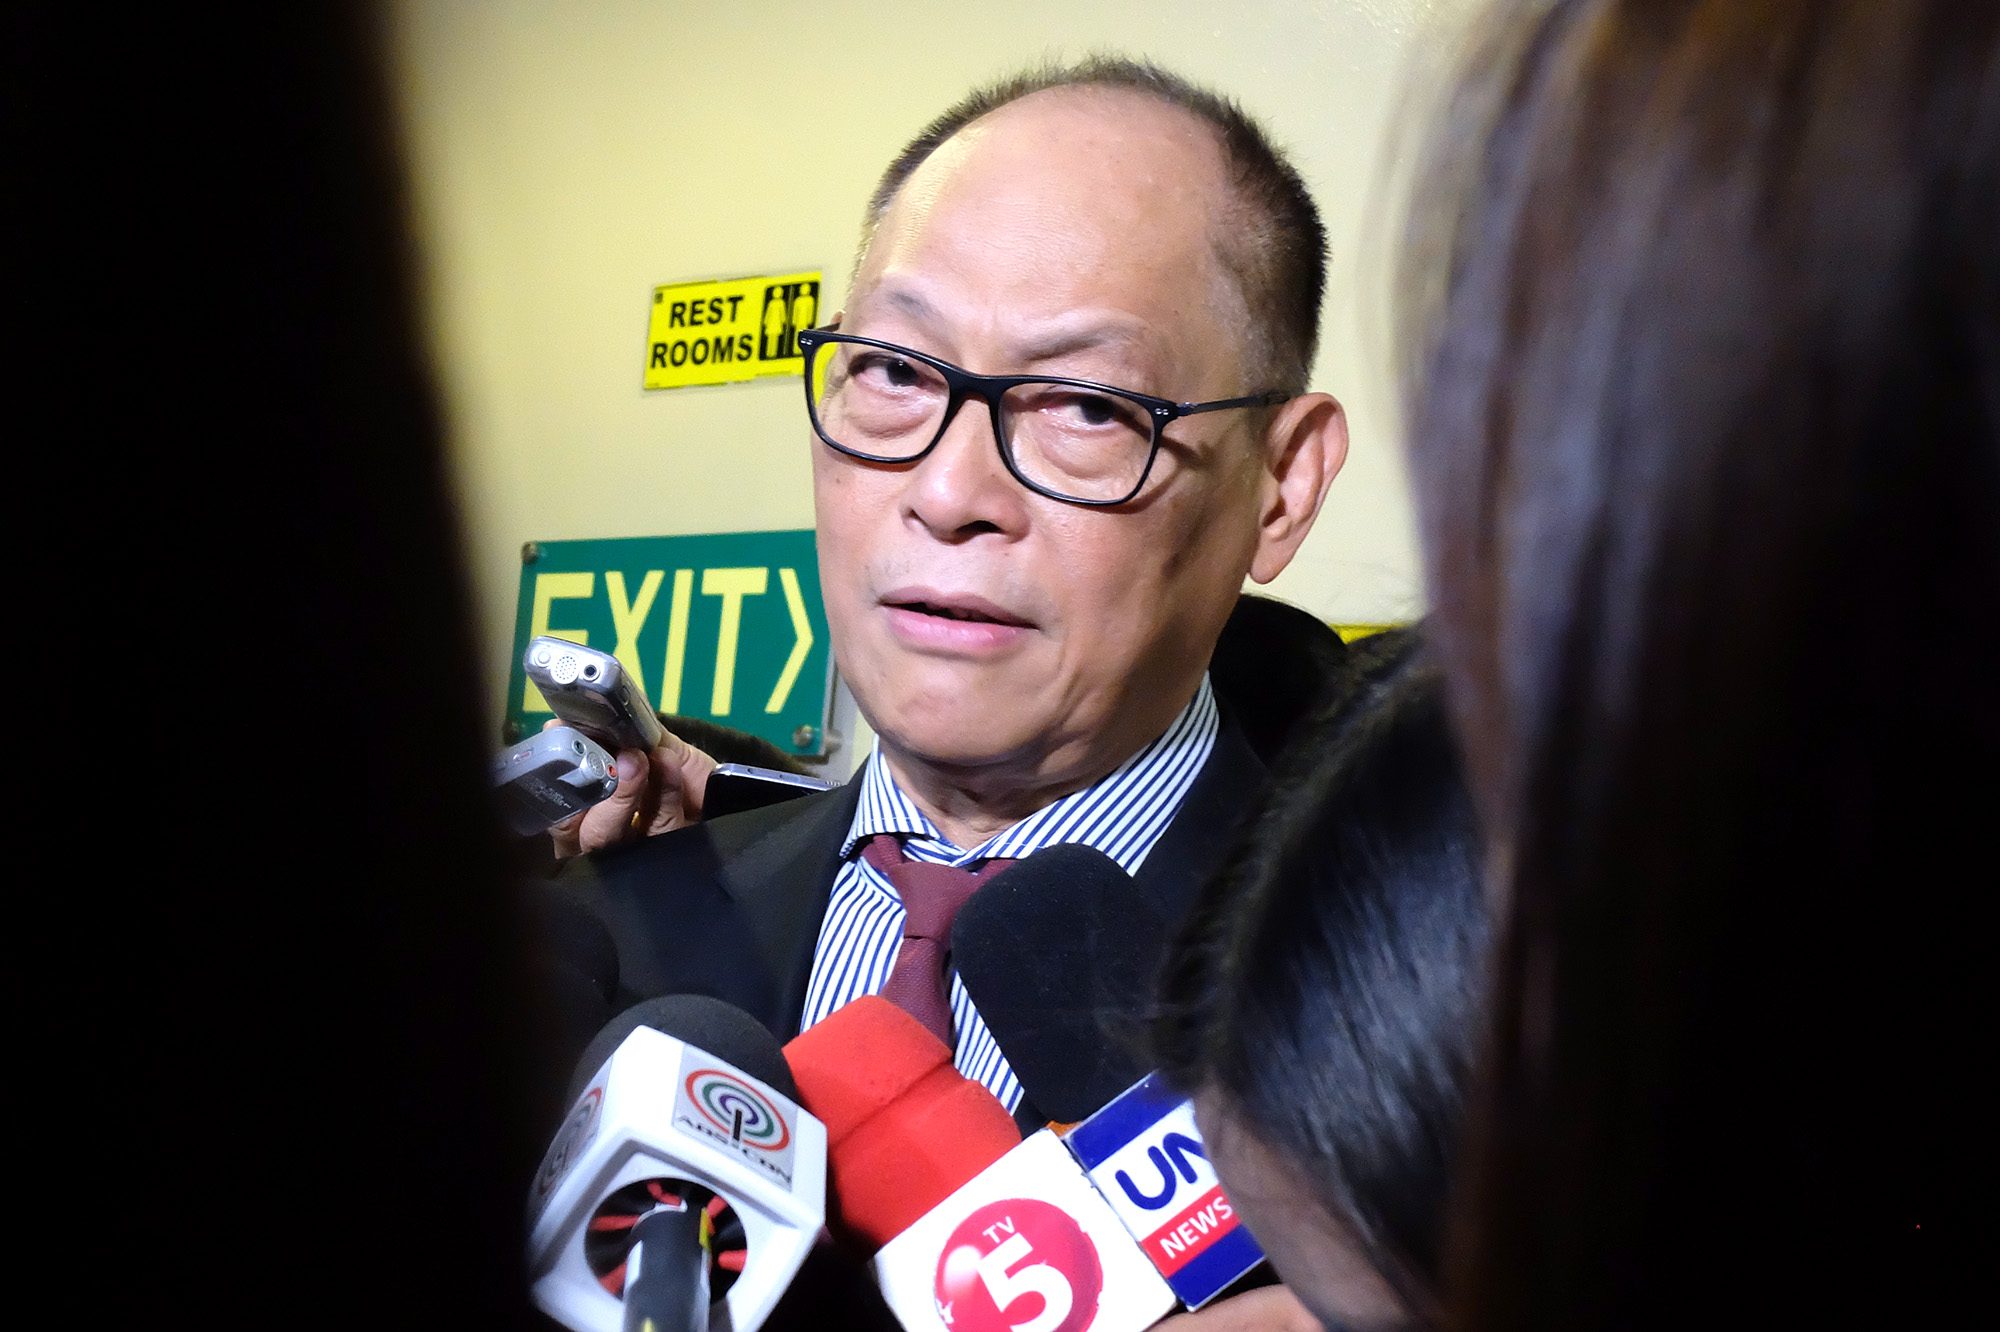 Enough for Diokno: No House probes, but open to Senate